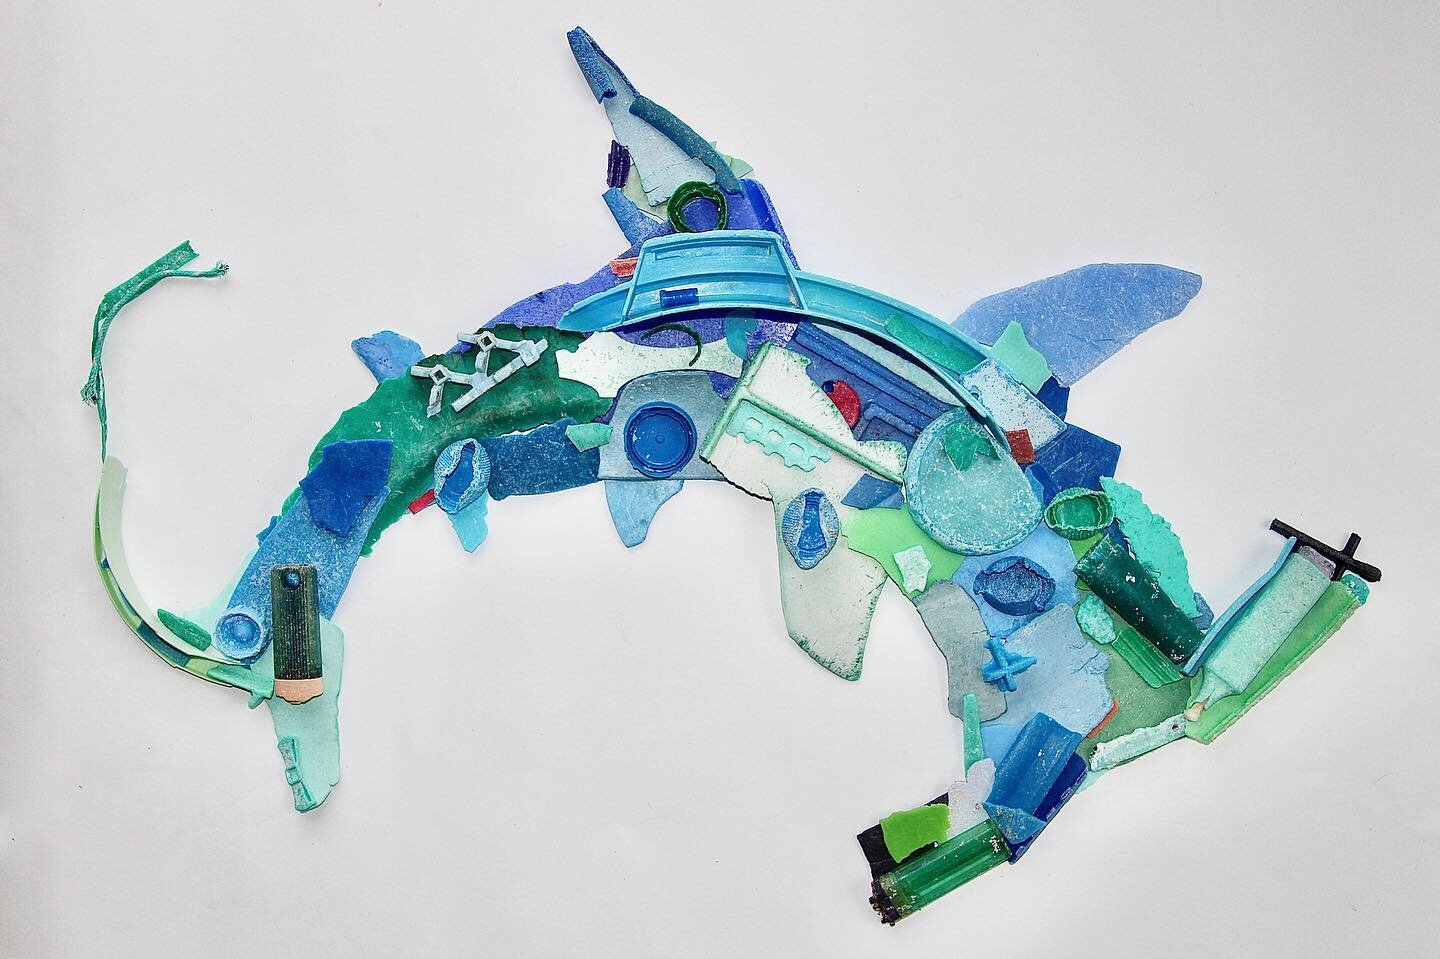 My ocean plastic piece inspired by my time scuba diving in Australia and the recent documentary #seaspiracy